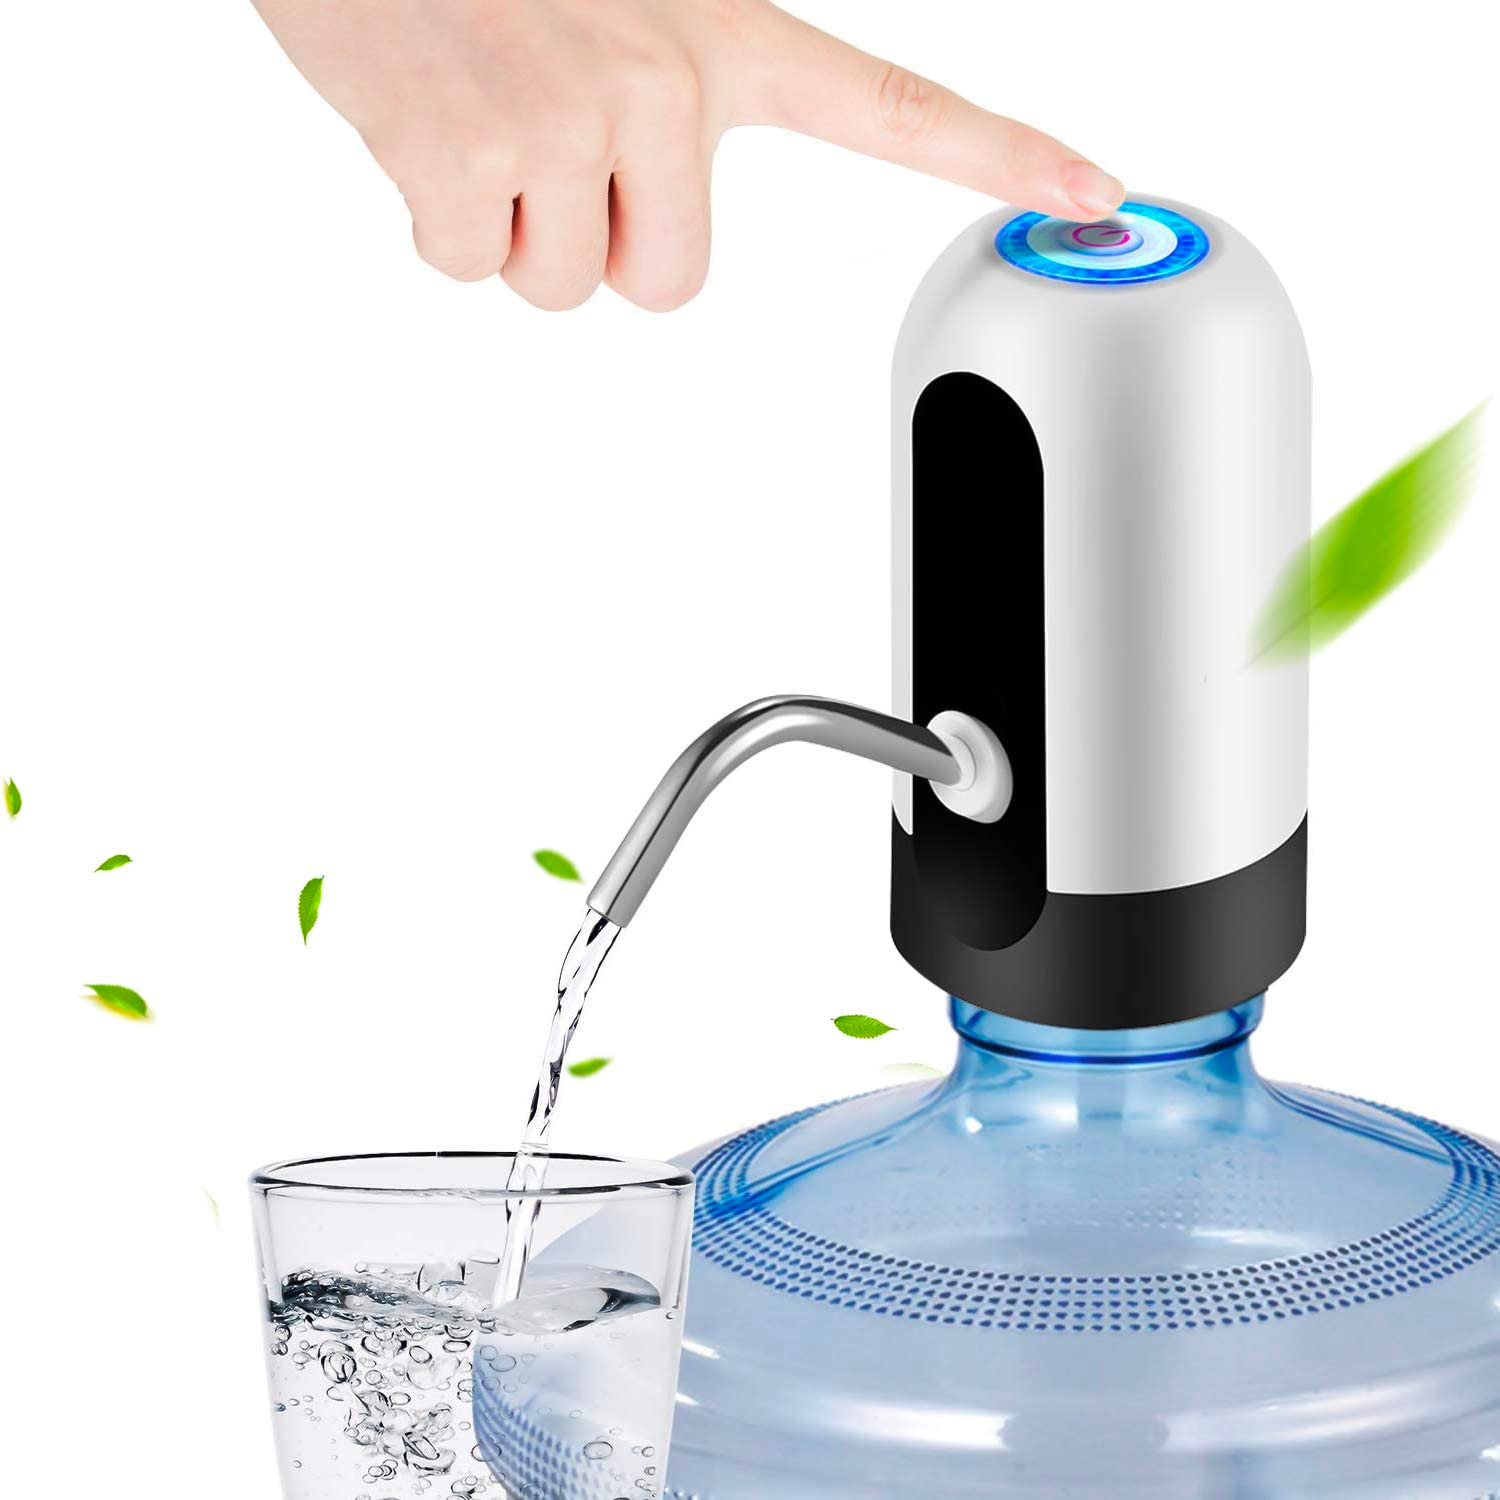 usb portable electric water dispenser, automatic water dispenser for dogs, automatic water dispenser for plants, automatic water dispenser for cats, automatic water dispenser pumpautomatic water dispenser price, automatic water dispenser with sensor, automatic water dispenser instructions, dog automatic water dispenser, how to use automatic water dispenser, best automatic water dispenser for cats